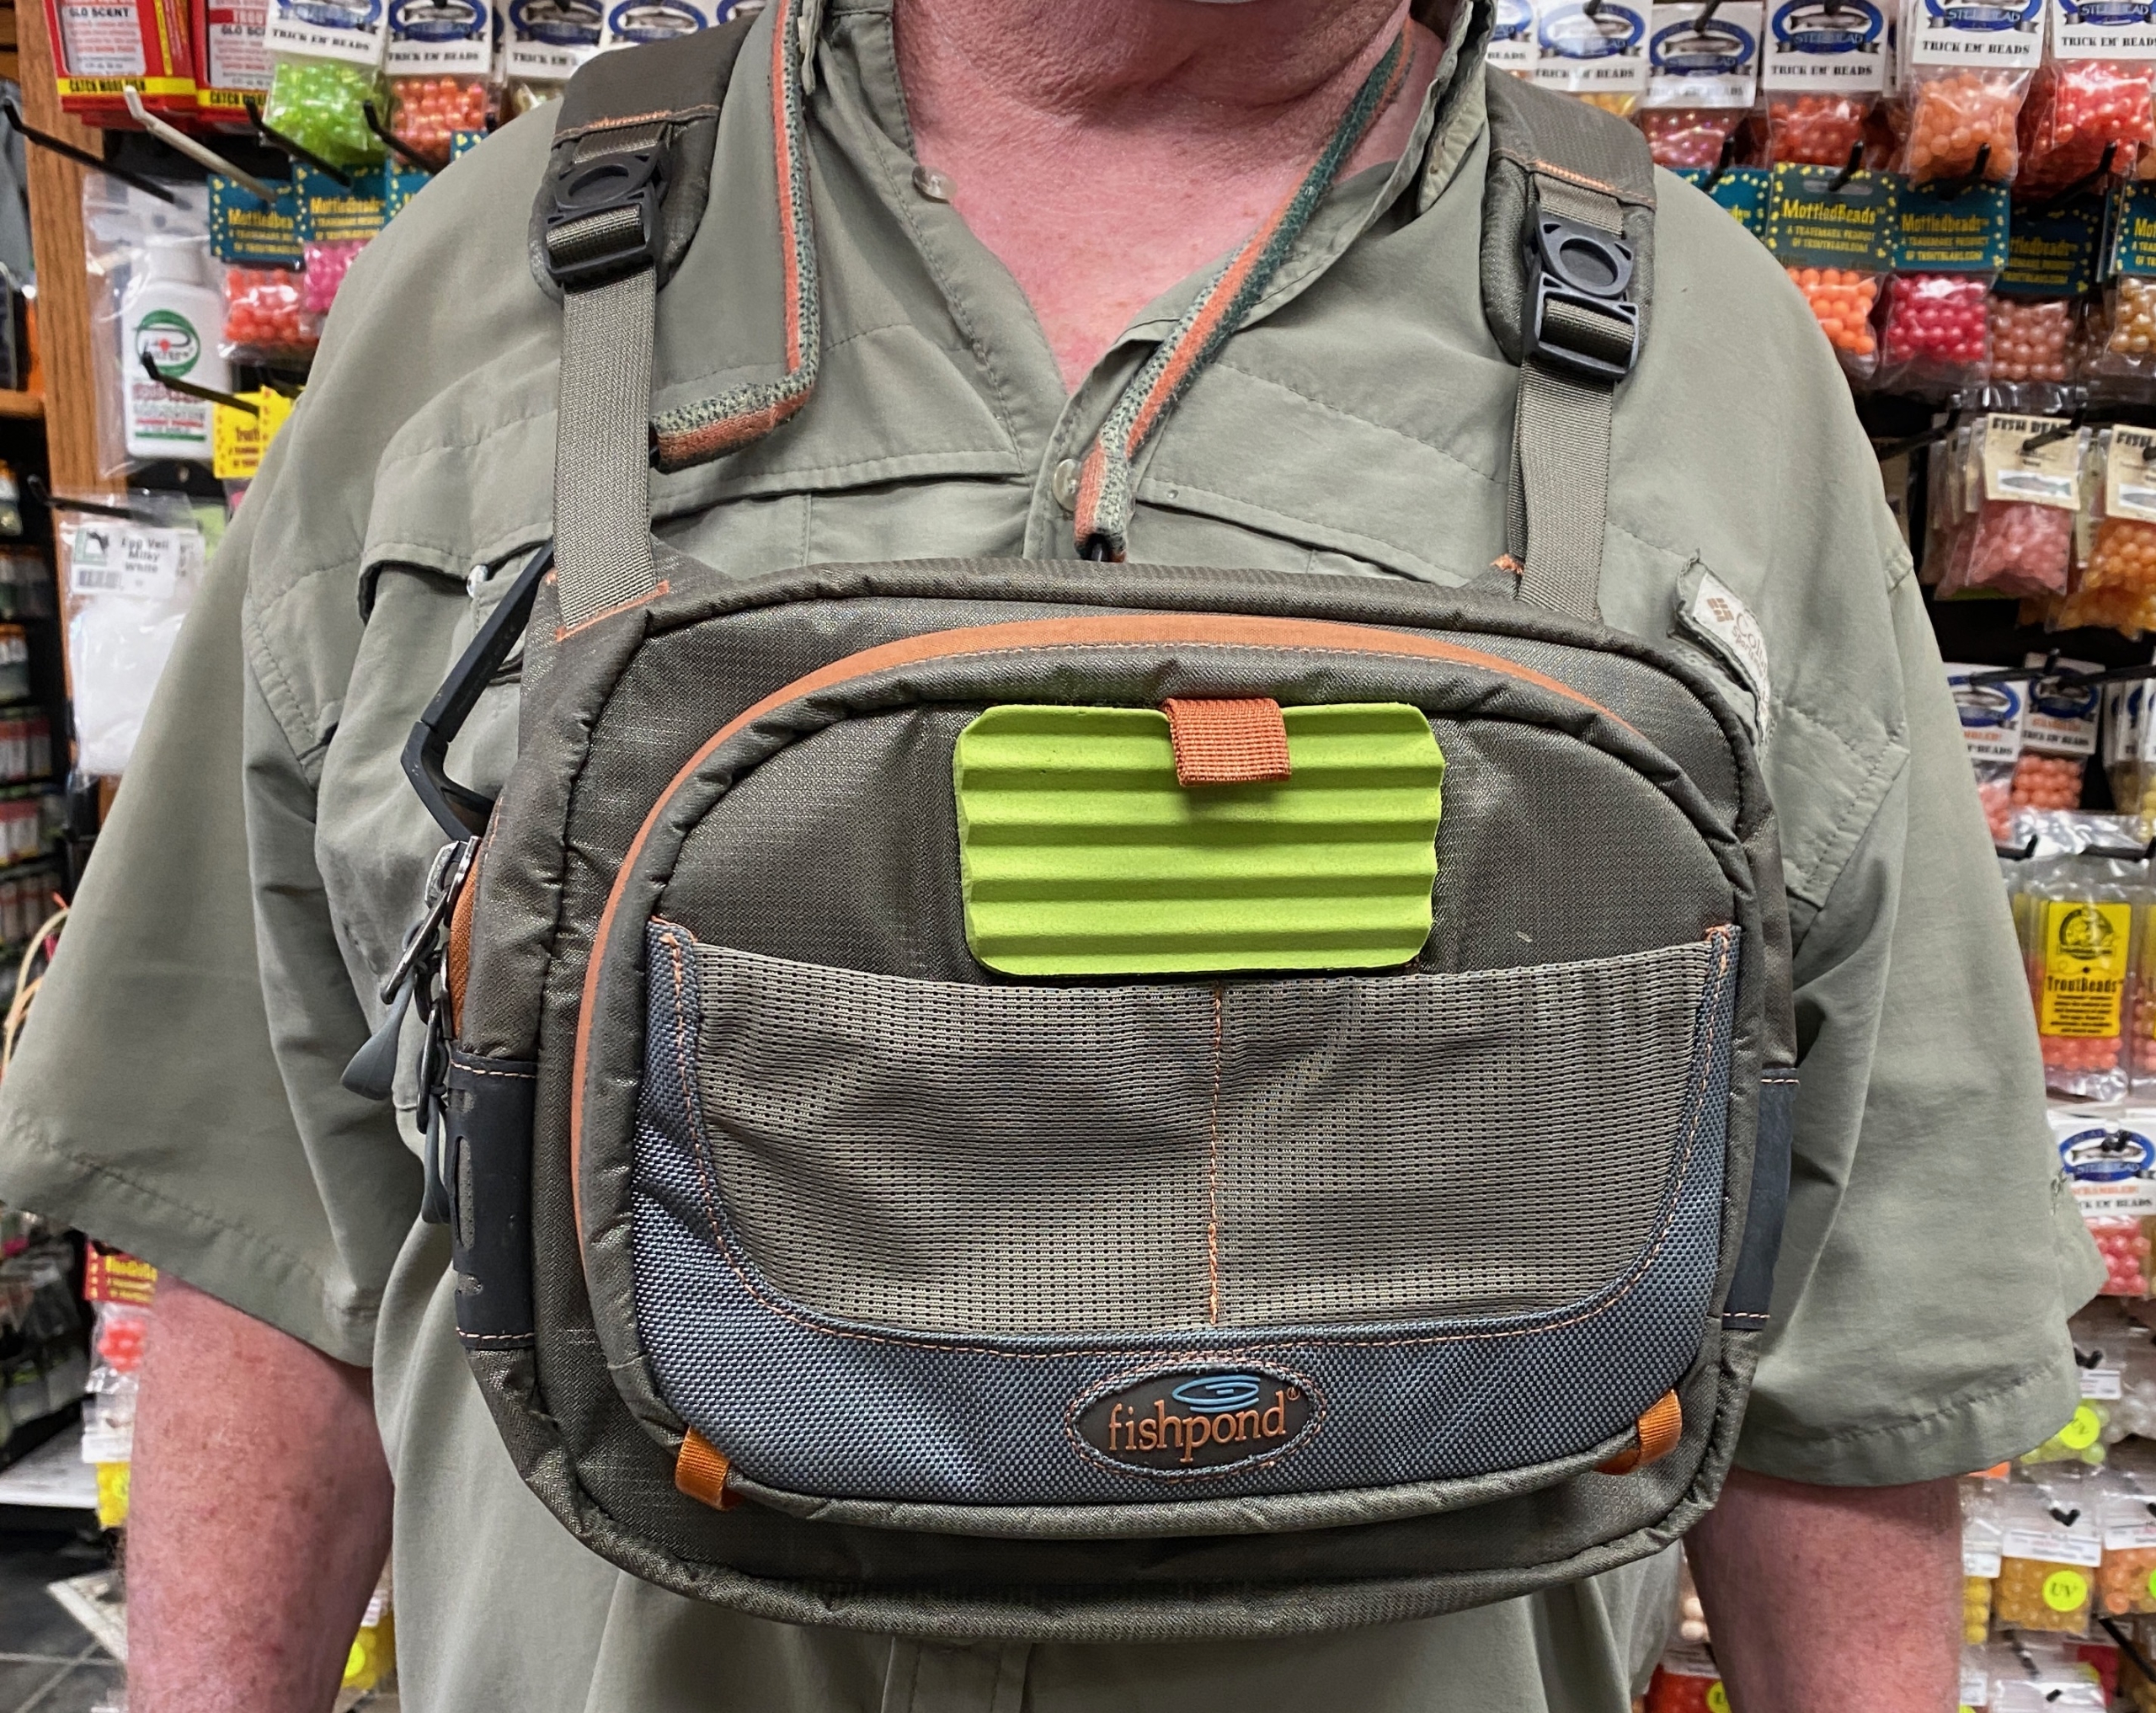 https://thefirstcast.ca/wp-content/uploads/2020/07/Fishpond-Cross-Current-Chestpack-Mike-McGrath-July-2020A-scaled.jpeg